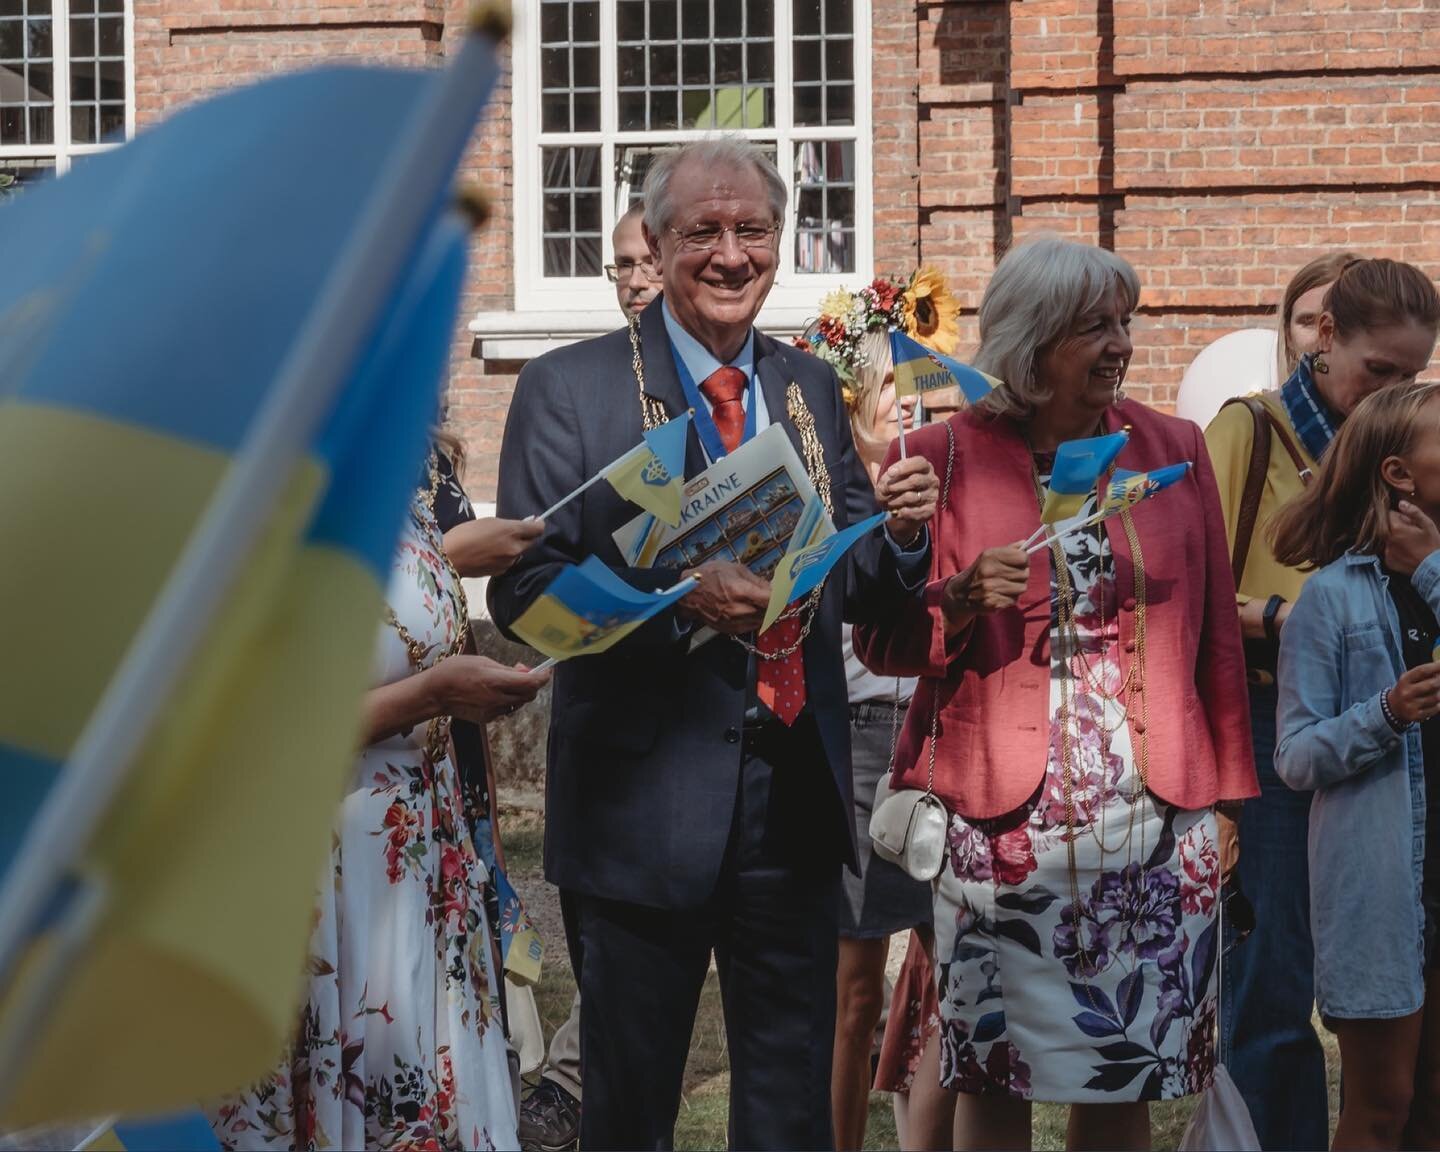 Ukrainian Independence Day 🇺🇦

I was so proud to have been asked to photograph this event. 
The atmosphere, the love and the laughter was beautiful. 
After a morning of crafts (which included making little dolls for the Ukrainian soldiers) the Lord